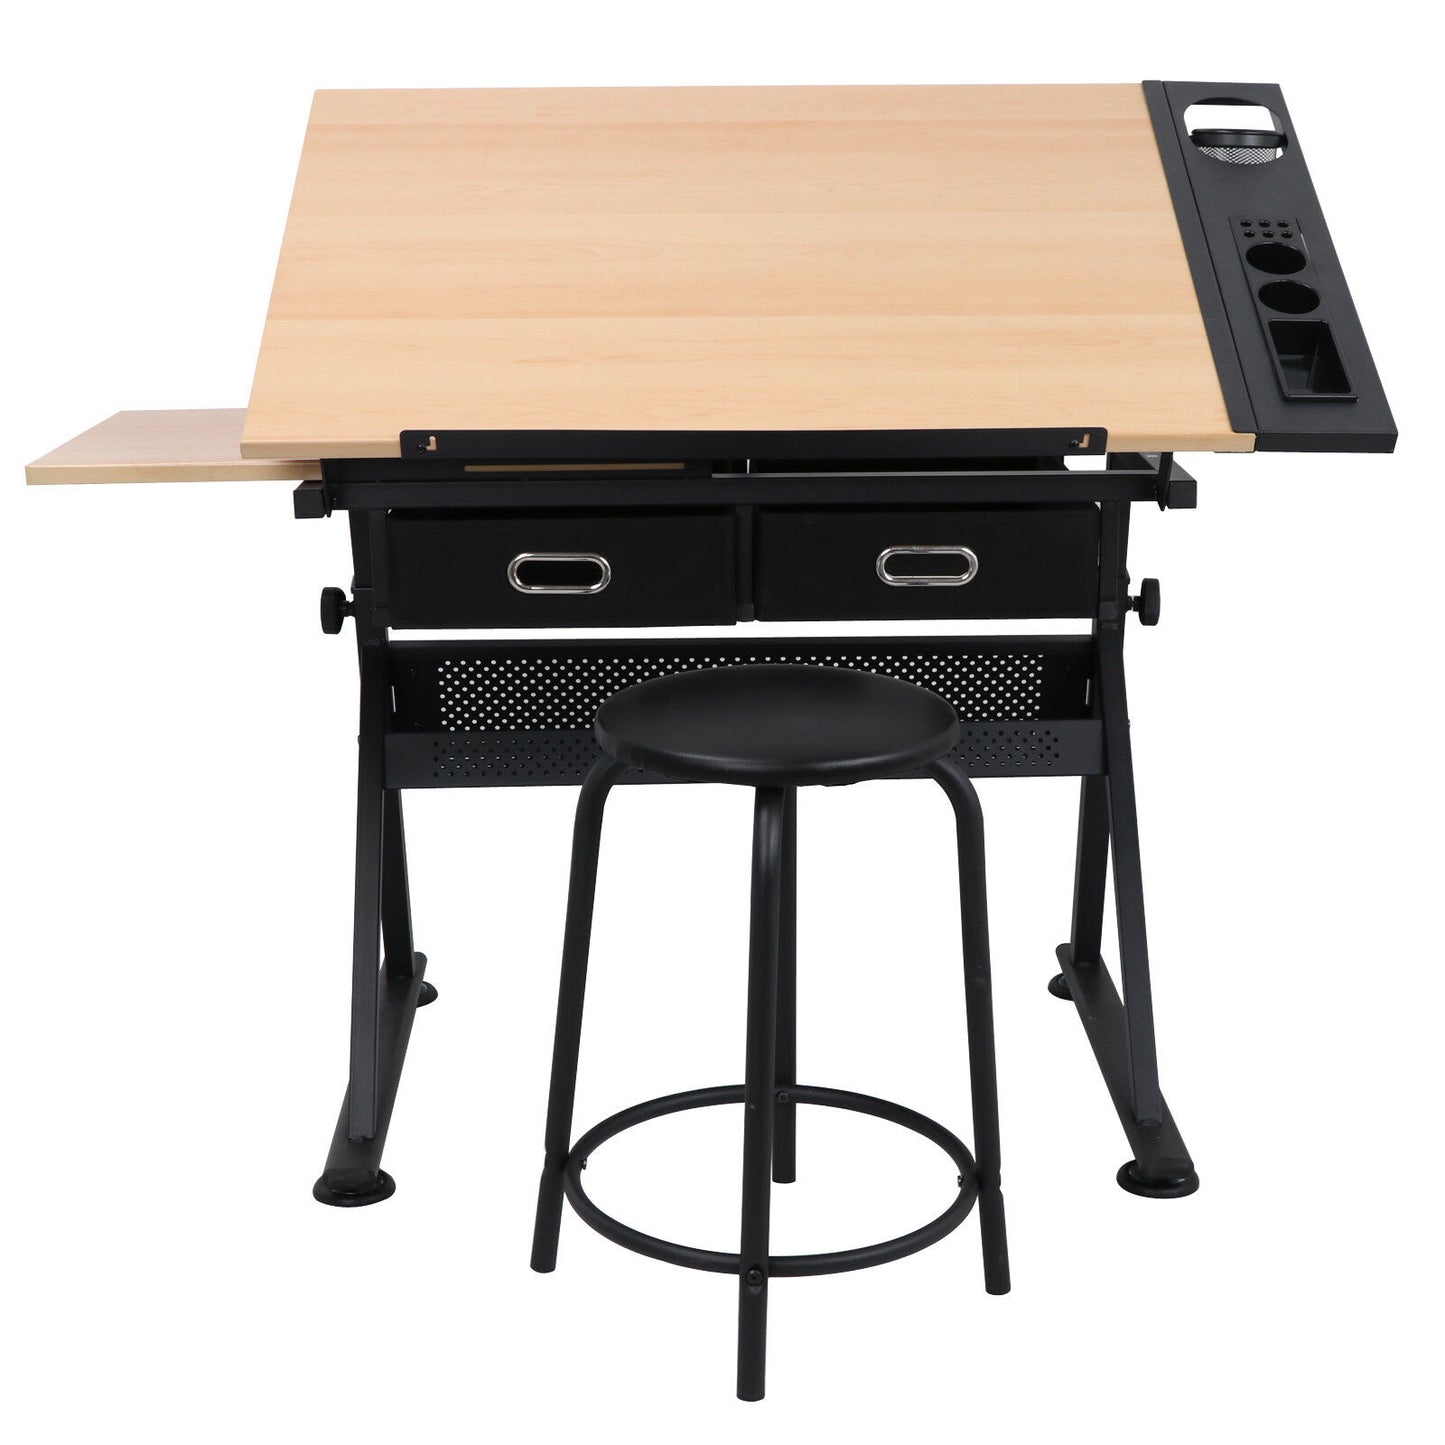 Drafting Drawing Table Tiltable Tabletop, Adjustable Height, Edge Stopper